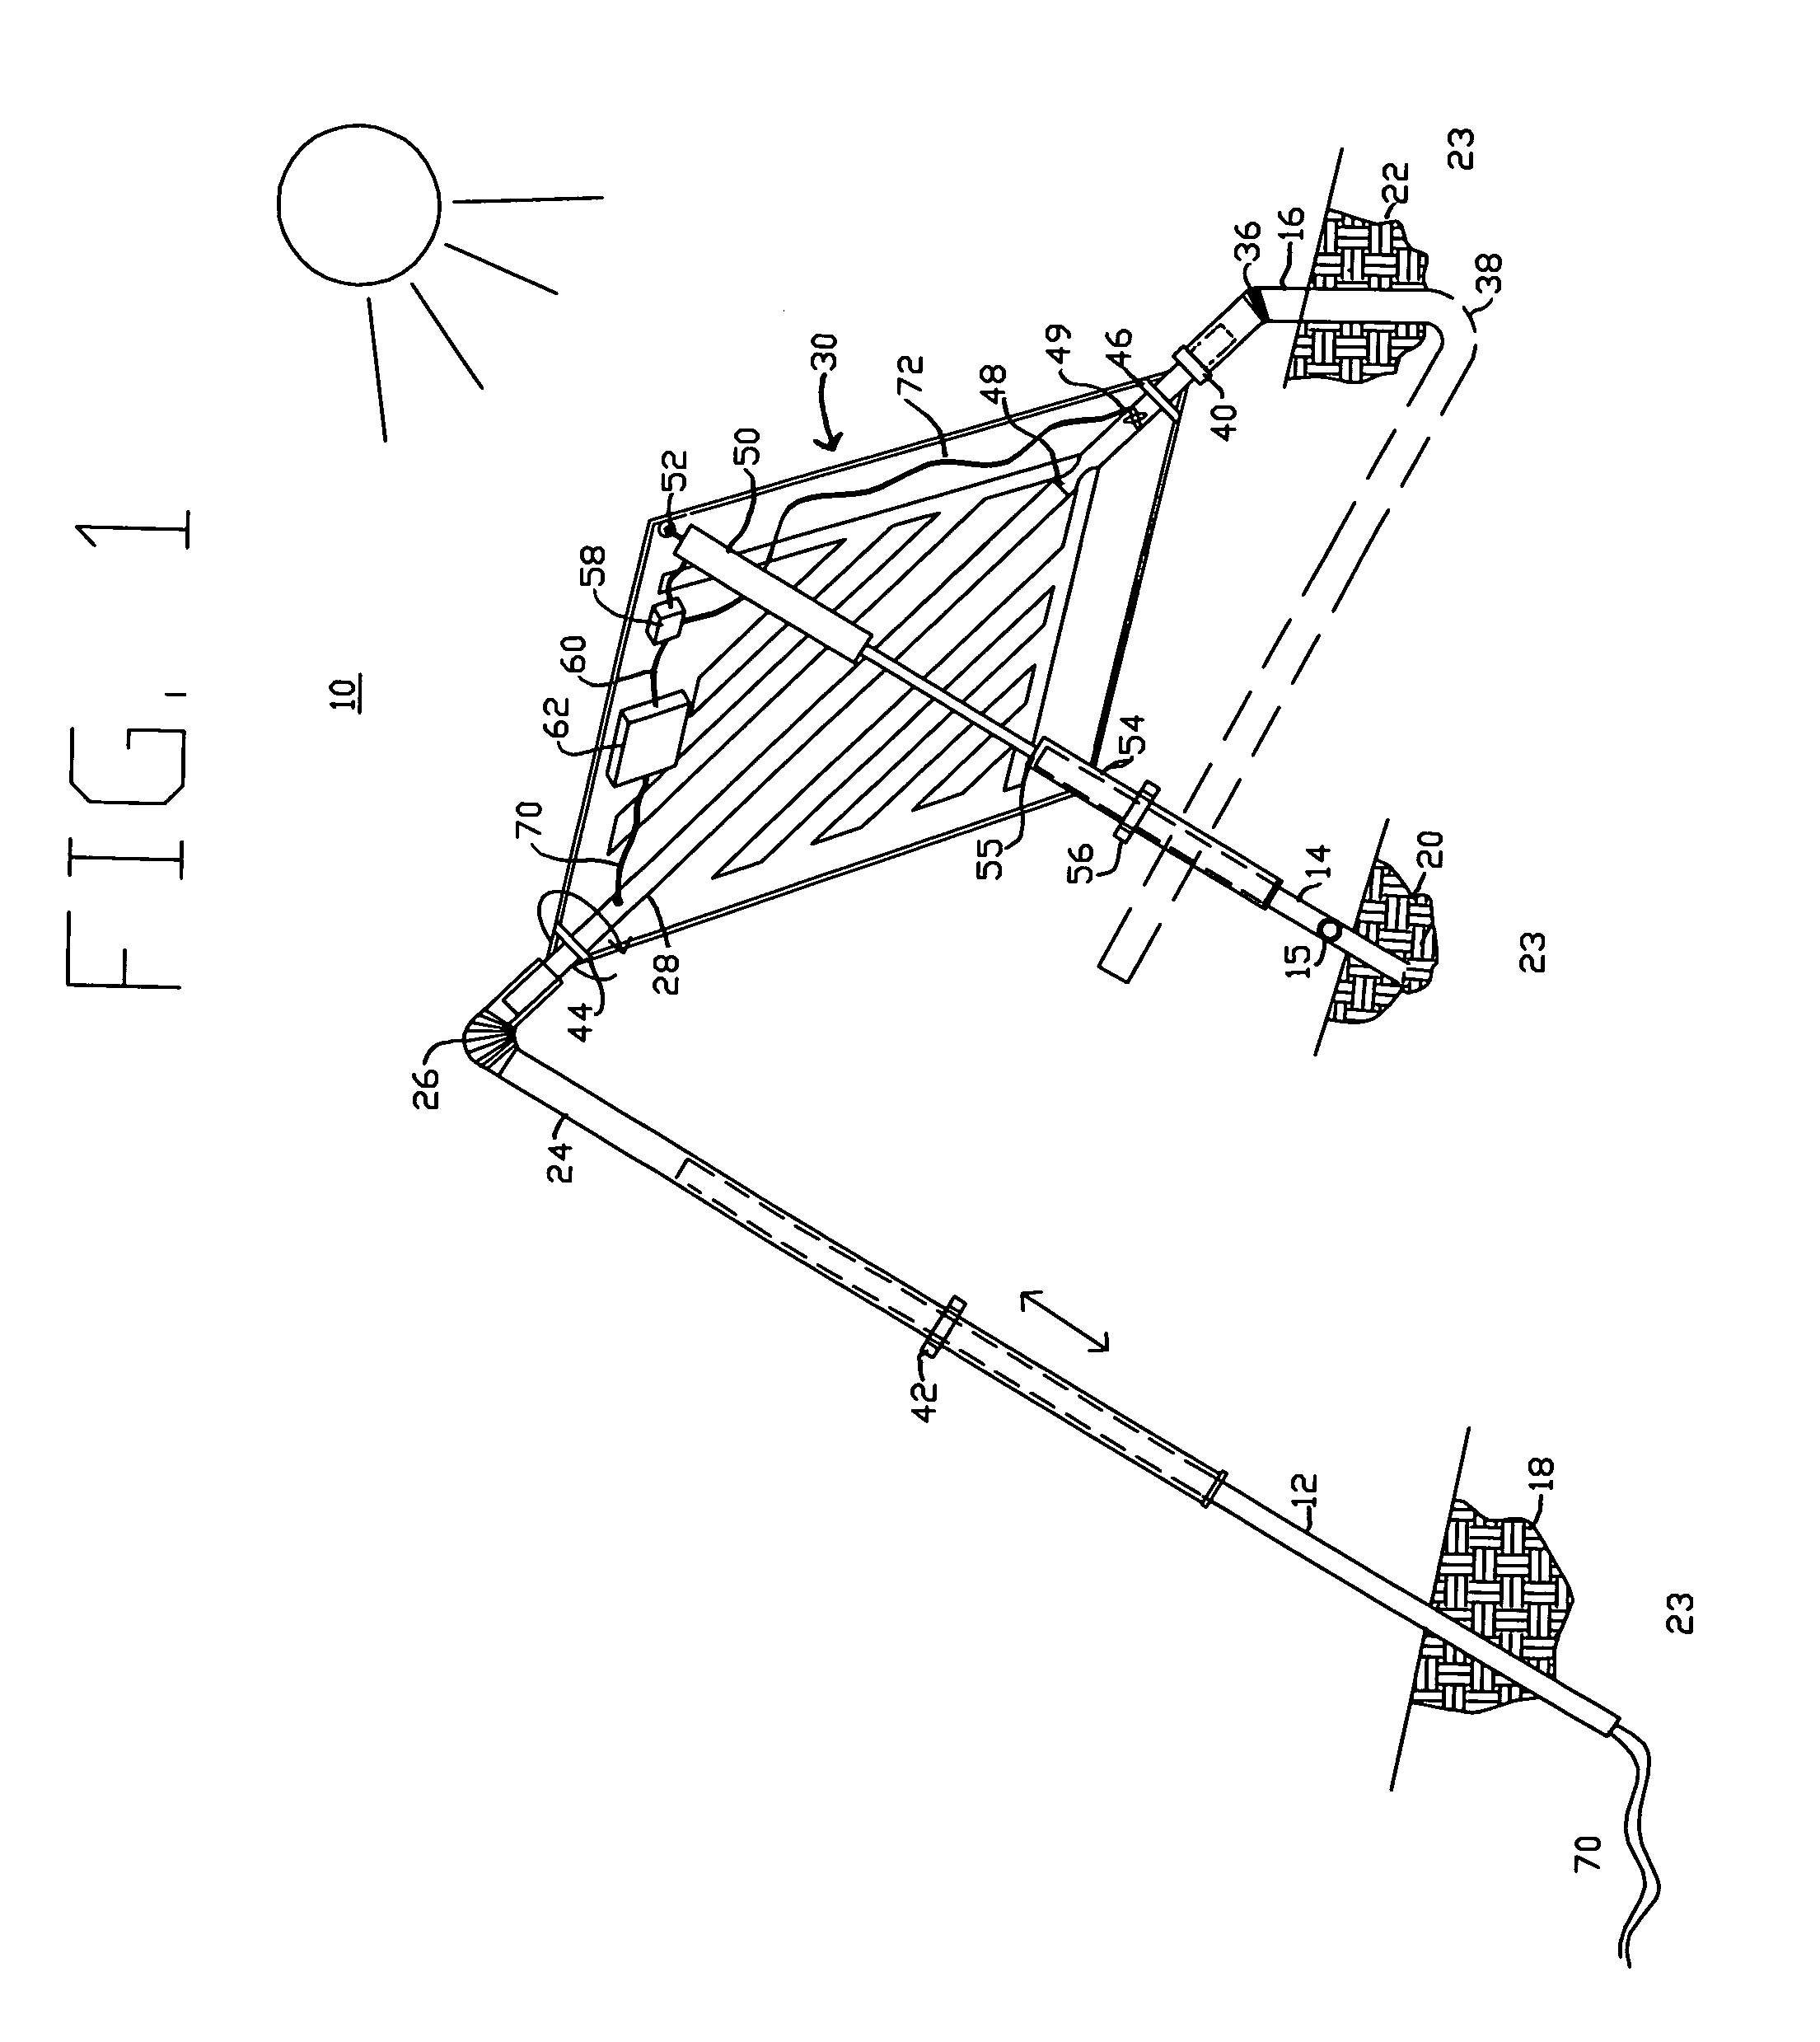 Device for supporting, aligning, and cooling a solar panel